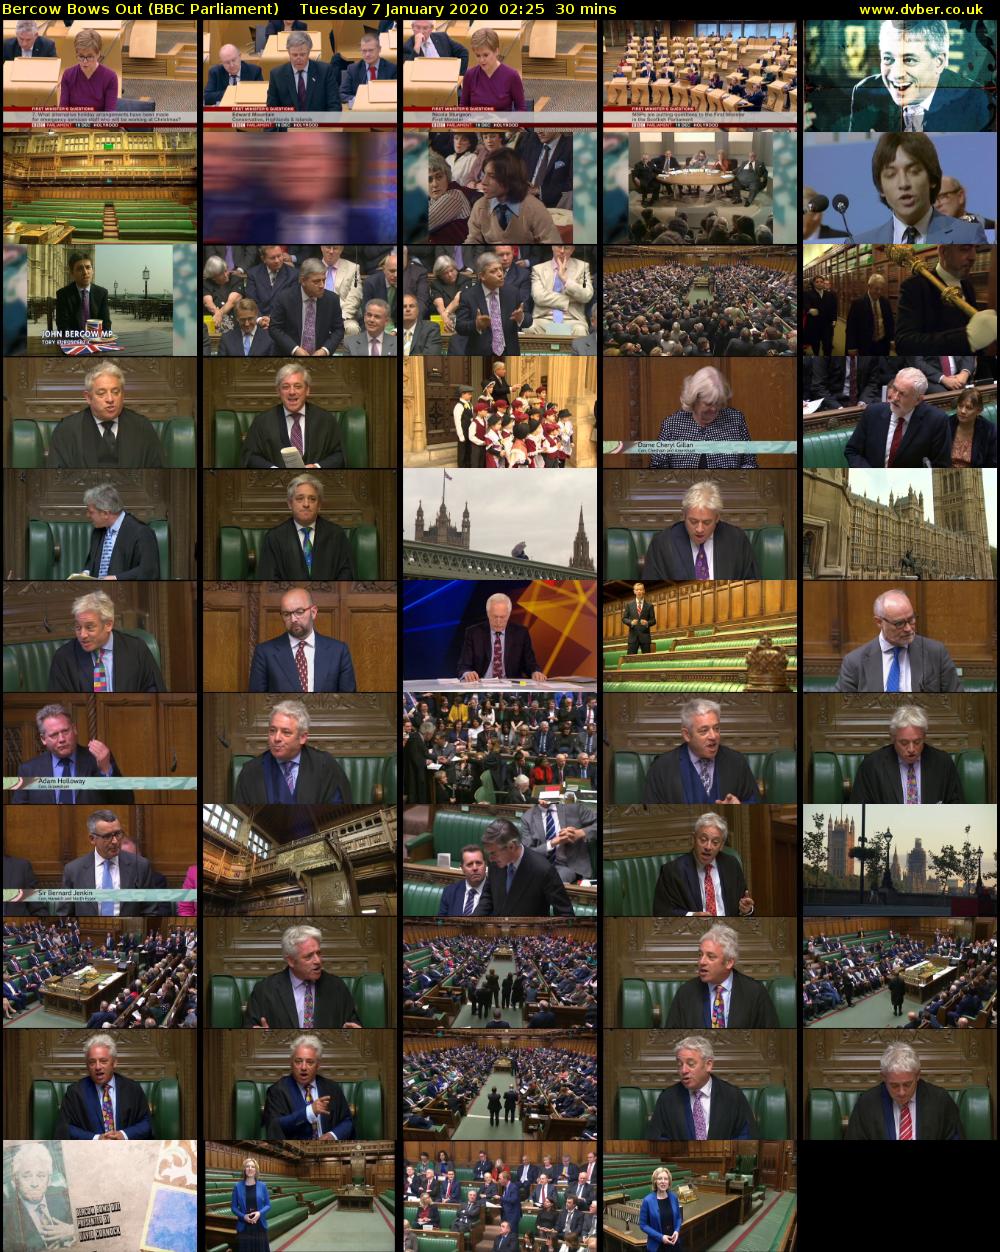 Bercow Bows Out (BBC Parliament) Tuesday 7 January 2020 02:25 - 02:55